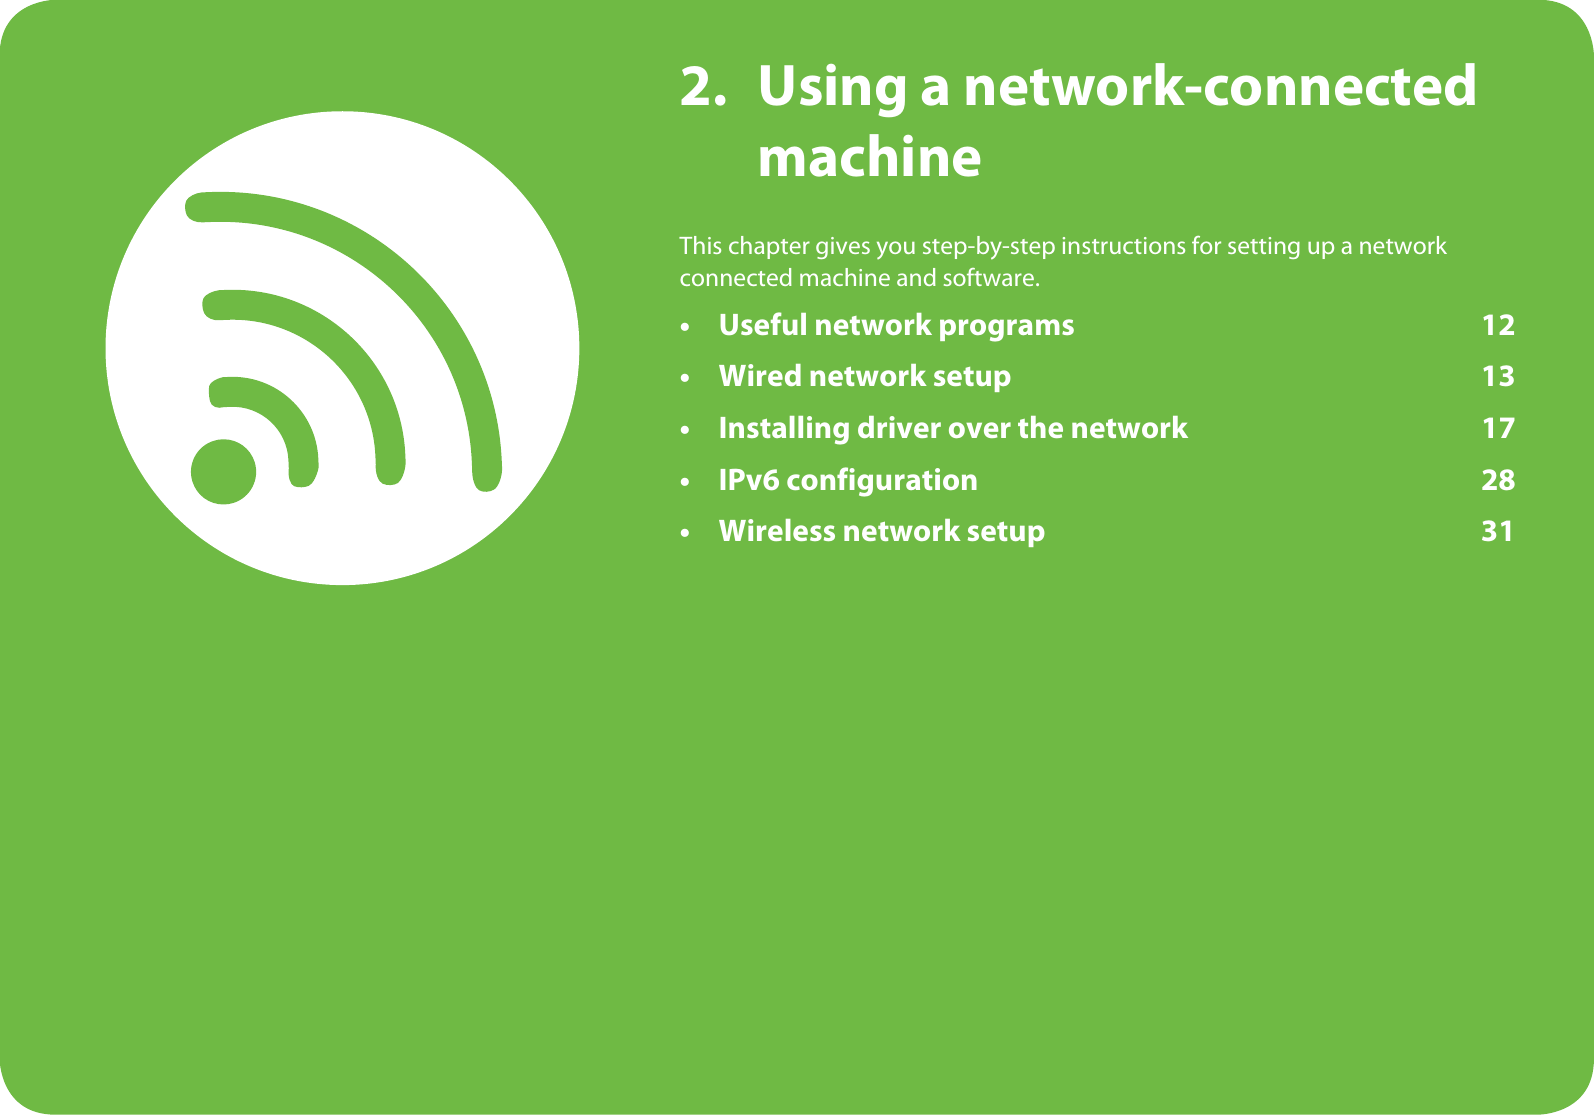 2. Using a network-connected machineThis chapter gives you step-by-step instructions for setting up a network connected machine and software.• Useful network programs 12• Wired network setup 13• Installing driver over the network 17• IPv6 configuration 28• Wireless network setup 31